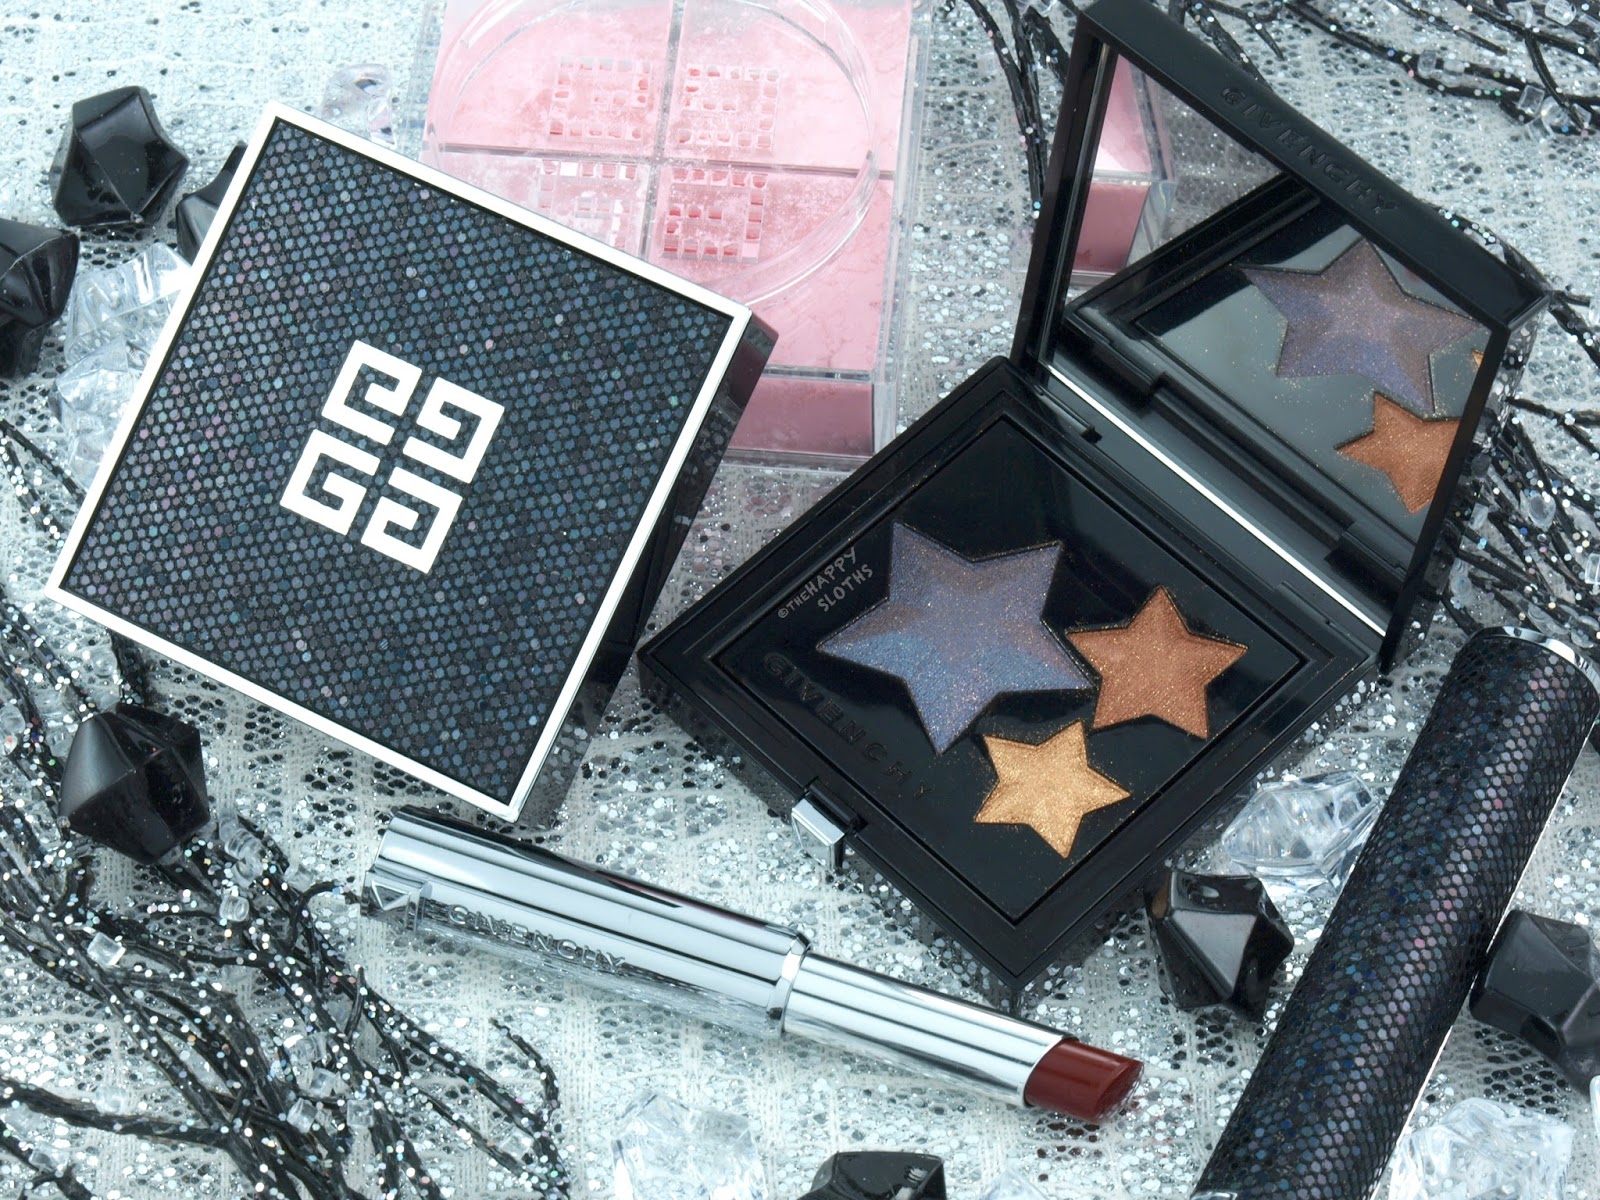 Givenchy Holiday 2017 Striking Night Lights Collection: Review and Swatches